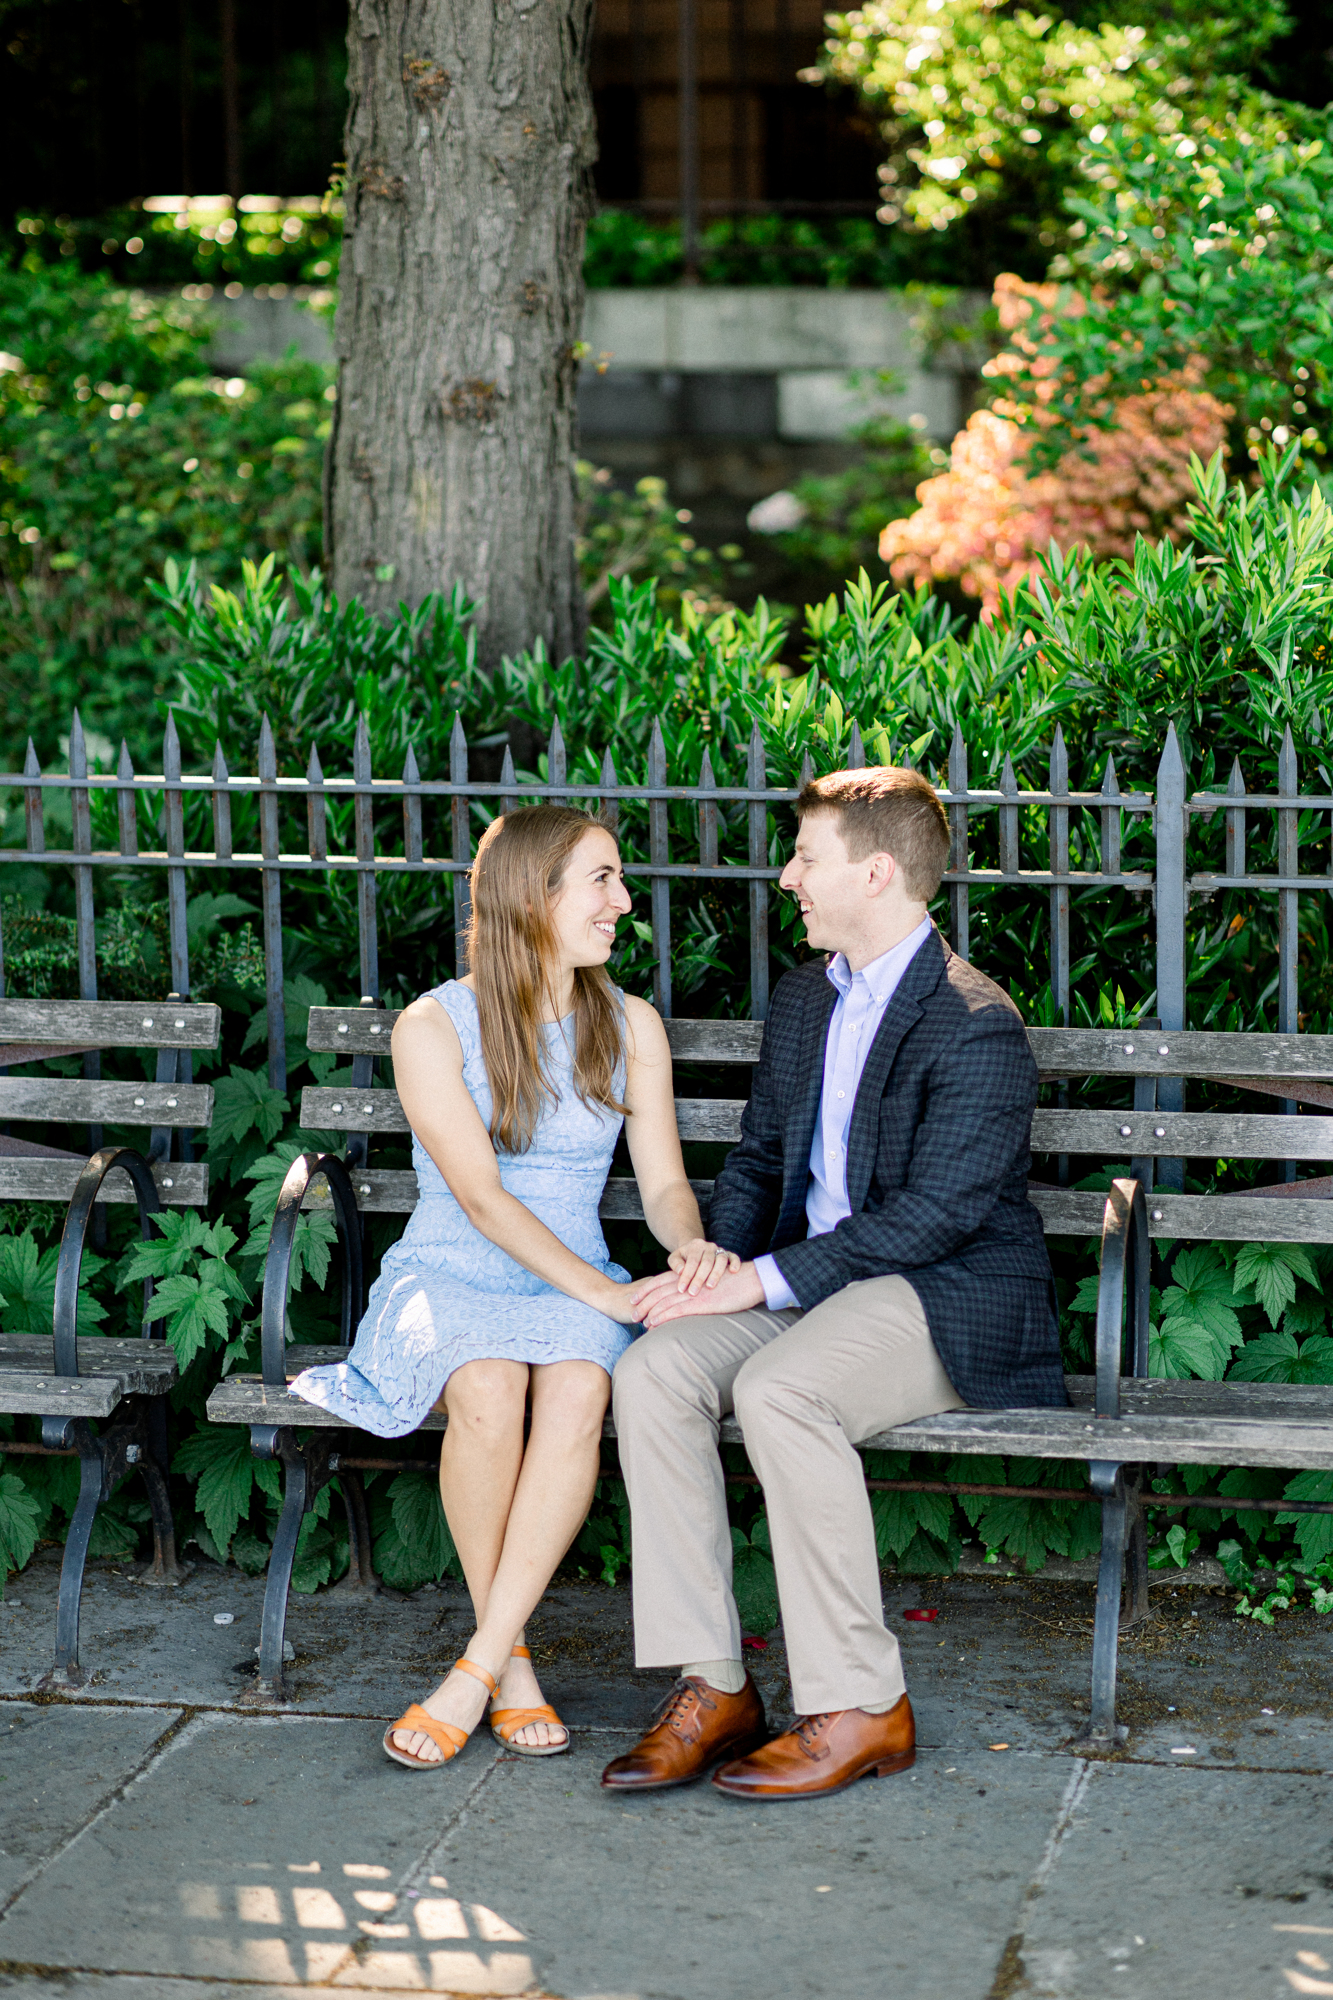 Radiant Brooklyn Heights Promenade Engagement Photography